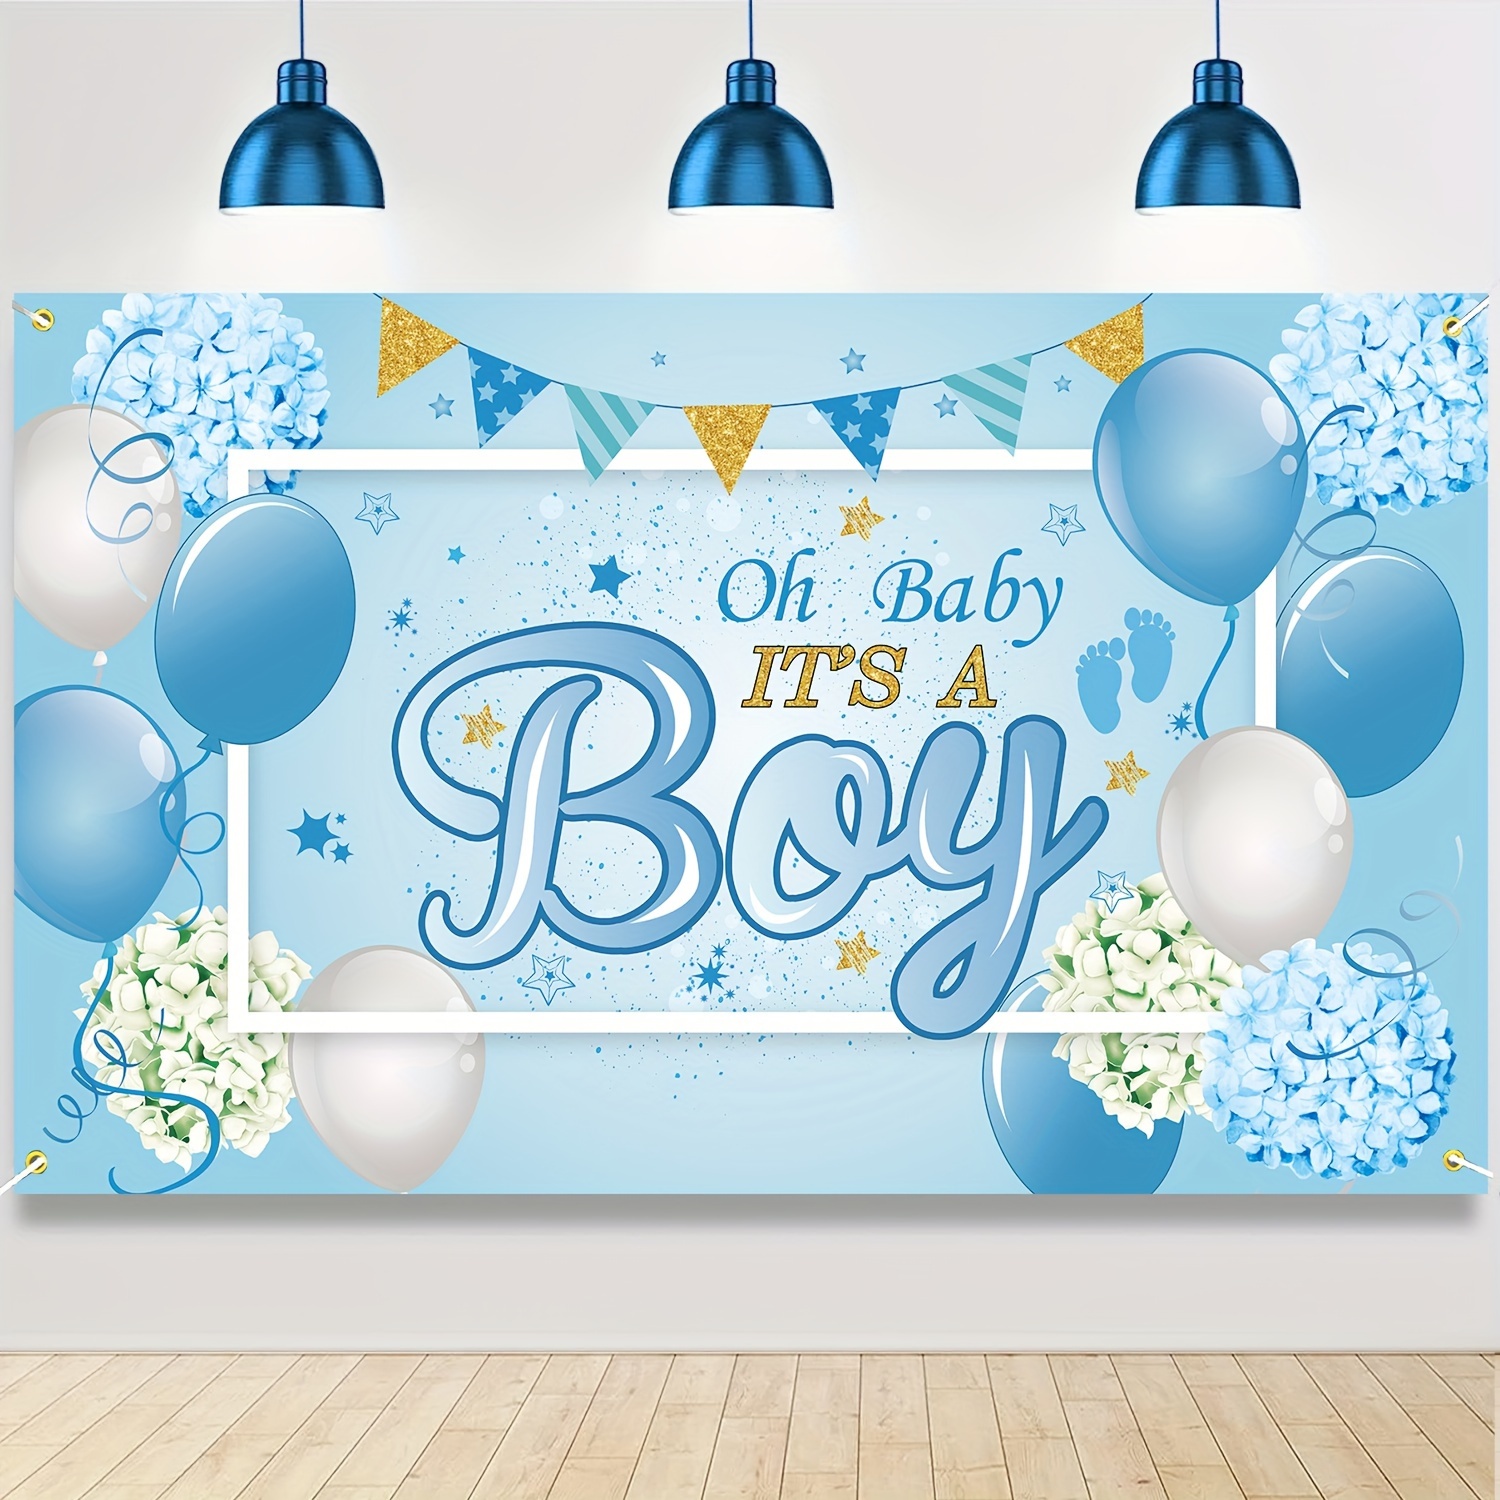 1pc 5x3ft Blue Silver Oh Baby Backdrop Little Feet Baby Shower Background  For Boy Footprint Baby Shower Photo Booth Backdrops Party Decorations Banner